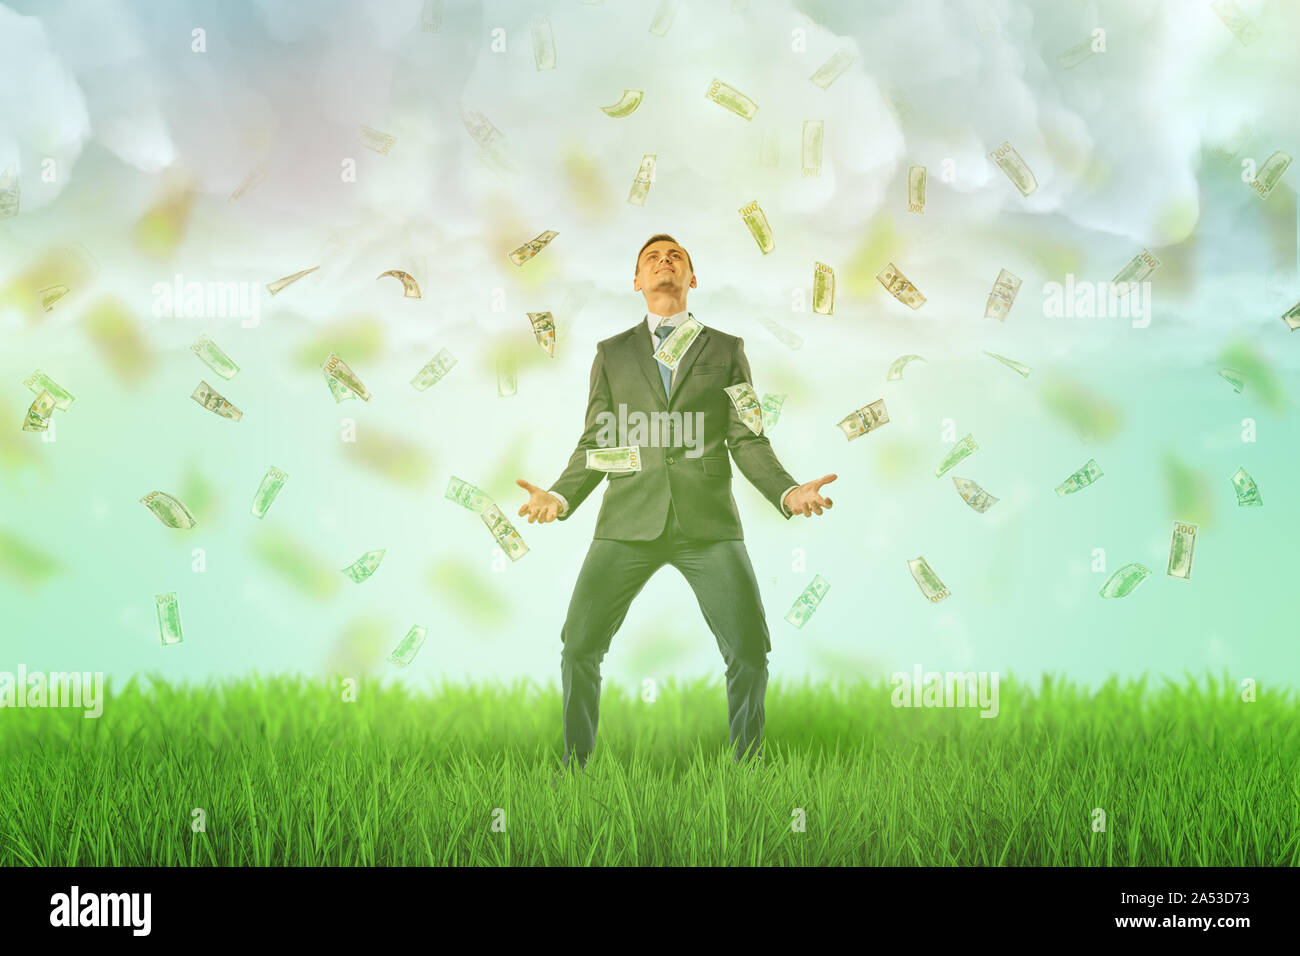 A happy businessman standing on a green lawn with a rain of dollar bills falling upon him from the cloudy sky. Stock Photo